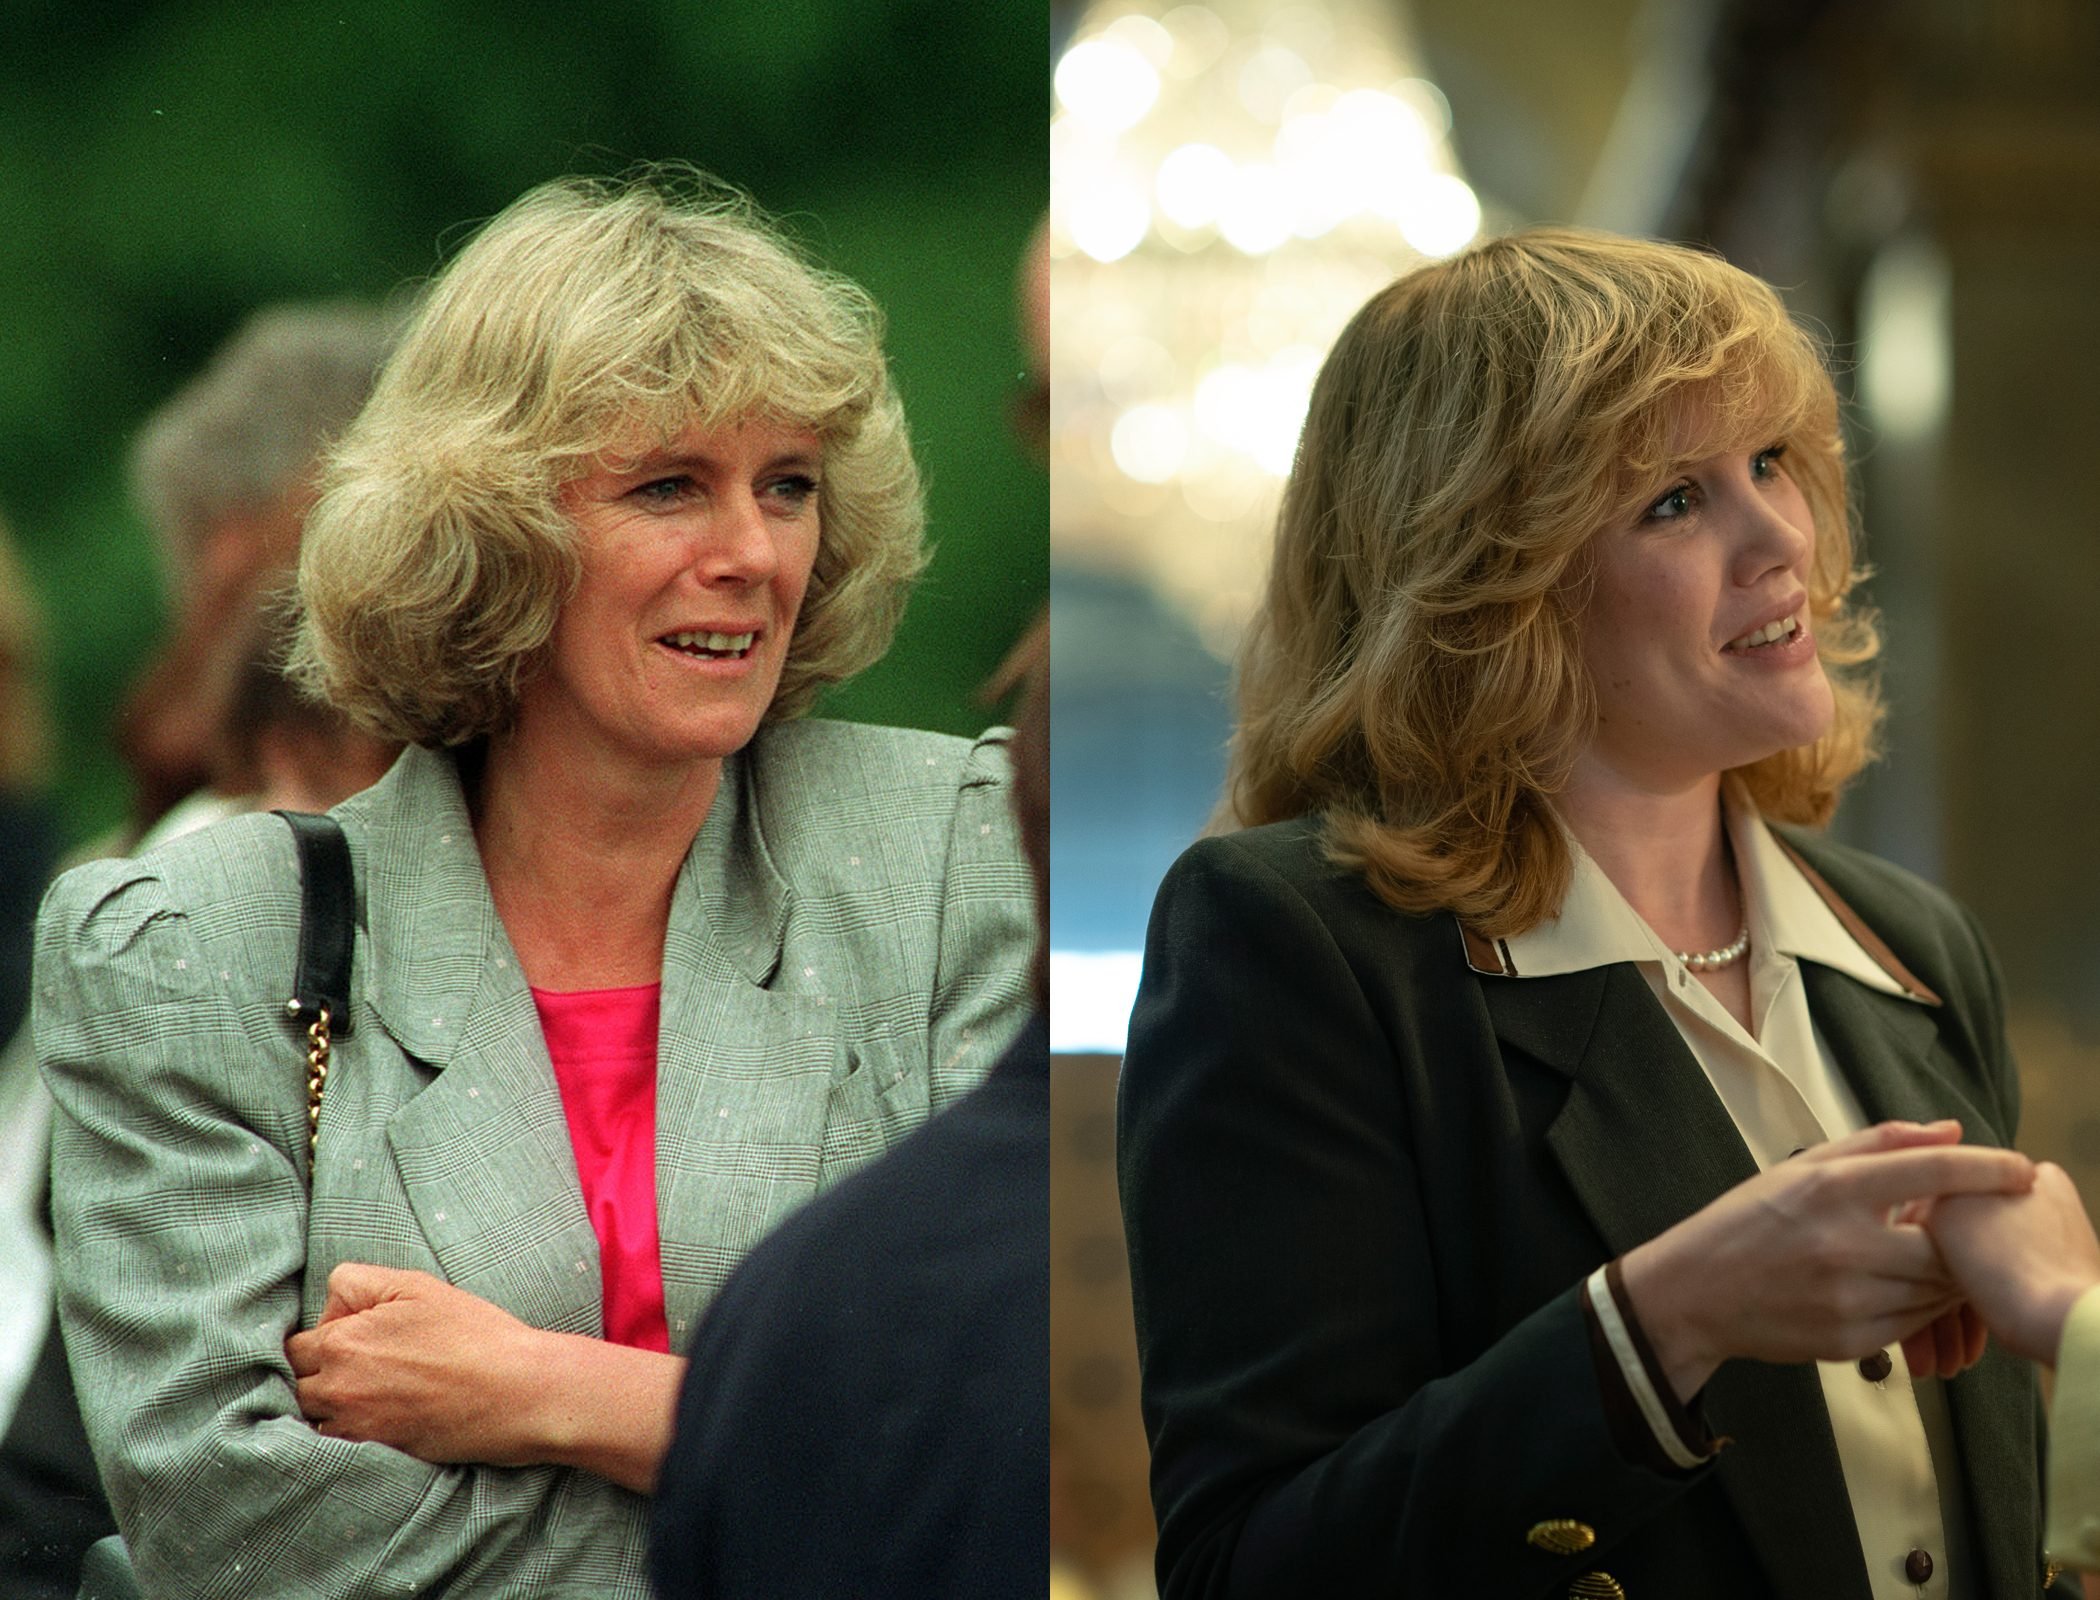 Camilla Shand Parker-Bowles, as played by Emerald Fennell